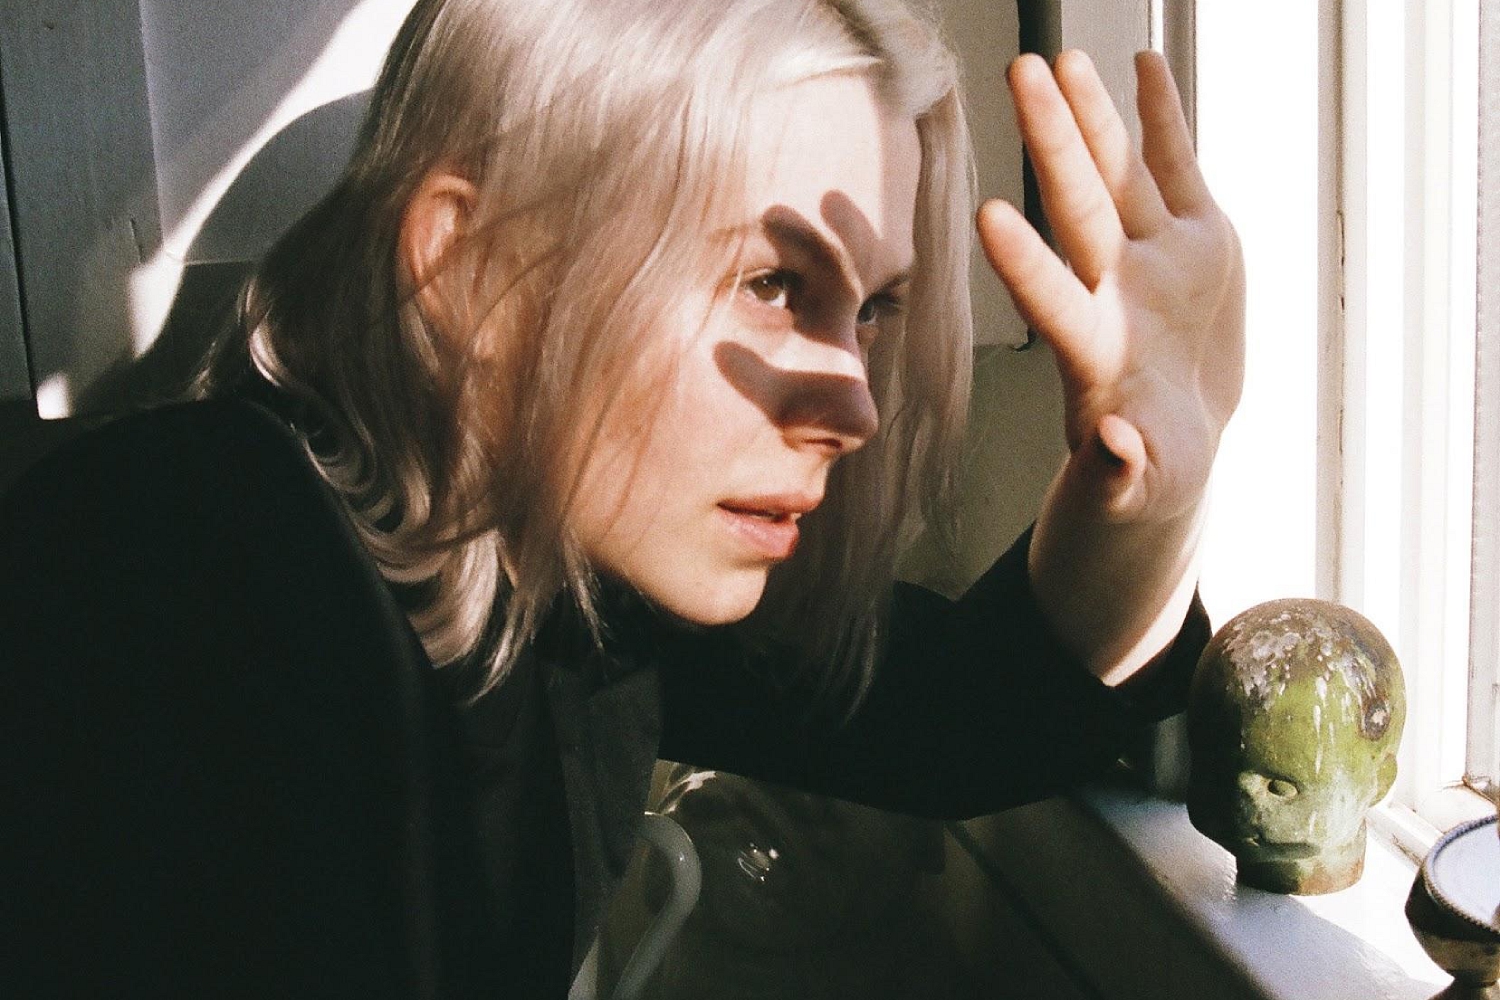 Phoebe Bridgers and Conor Oberst are teasing something called the ‘Better Oblivion Community Center’